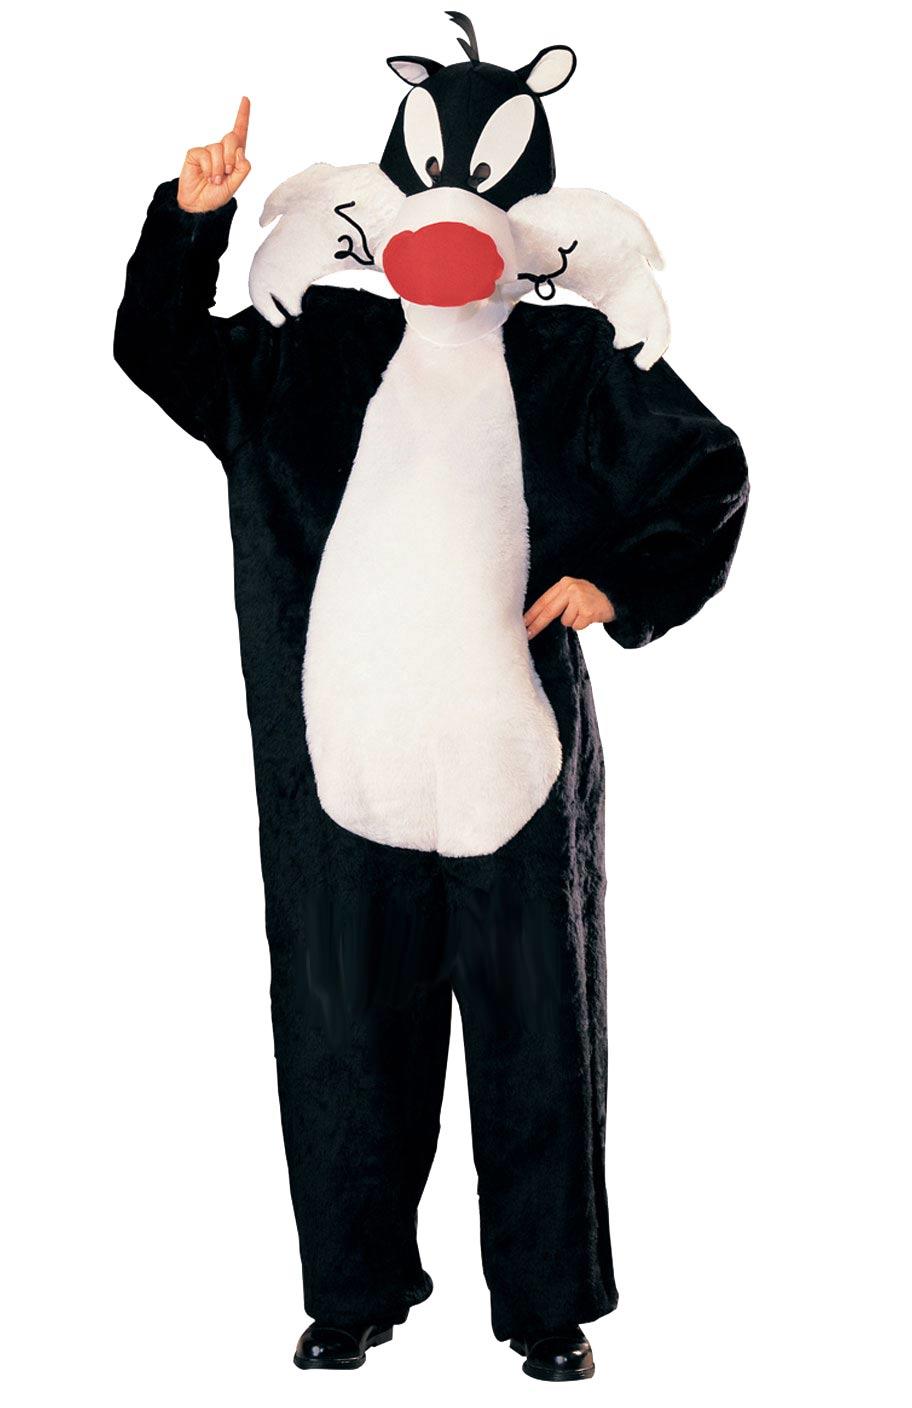 Sylvester The Cat Adult Looney Tunes Fancy Dress Costume by Rubies 15562 fully licensed by Warner Bros and available here at Karnival Costumes online party shop